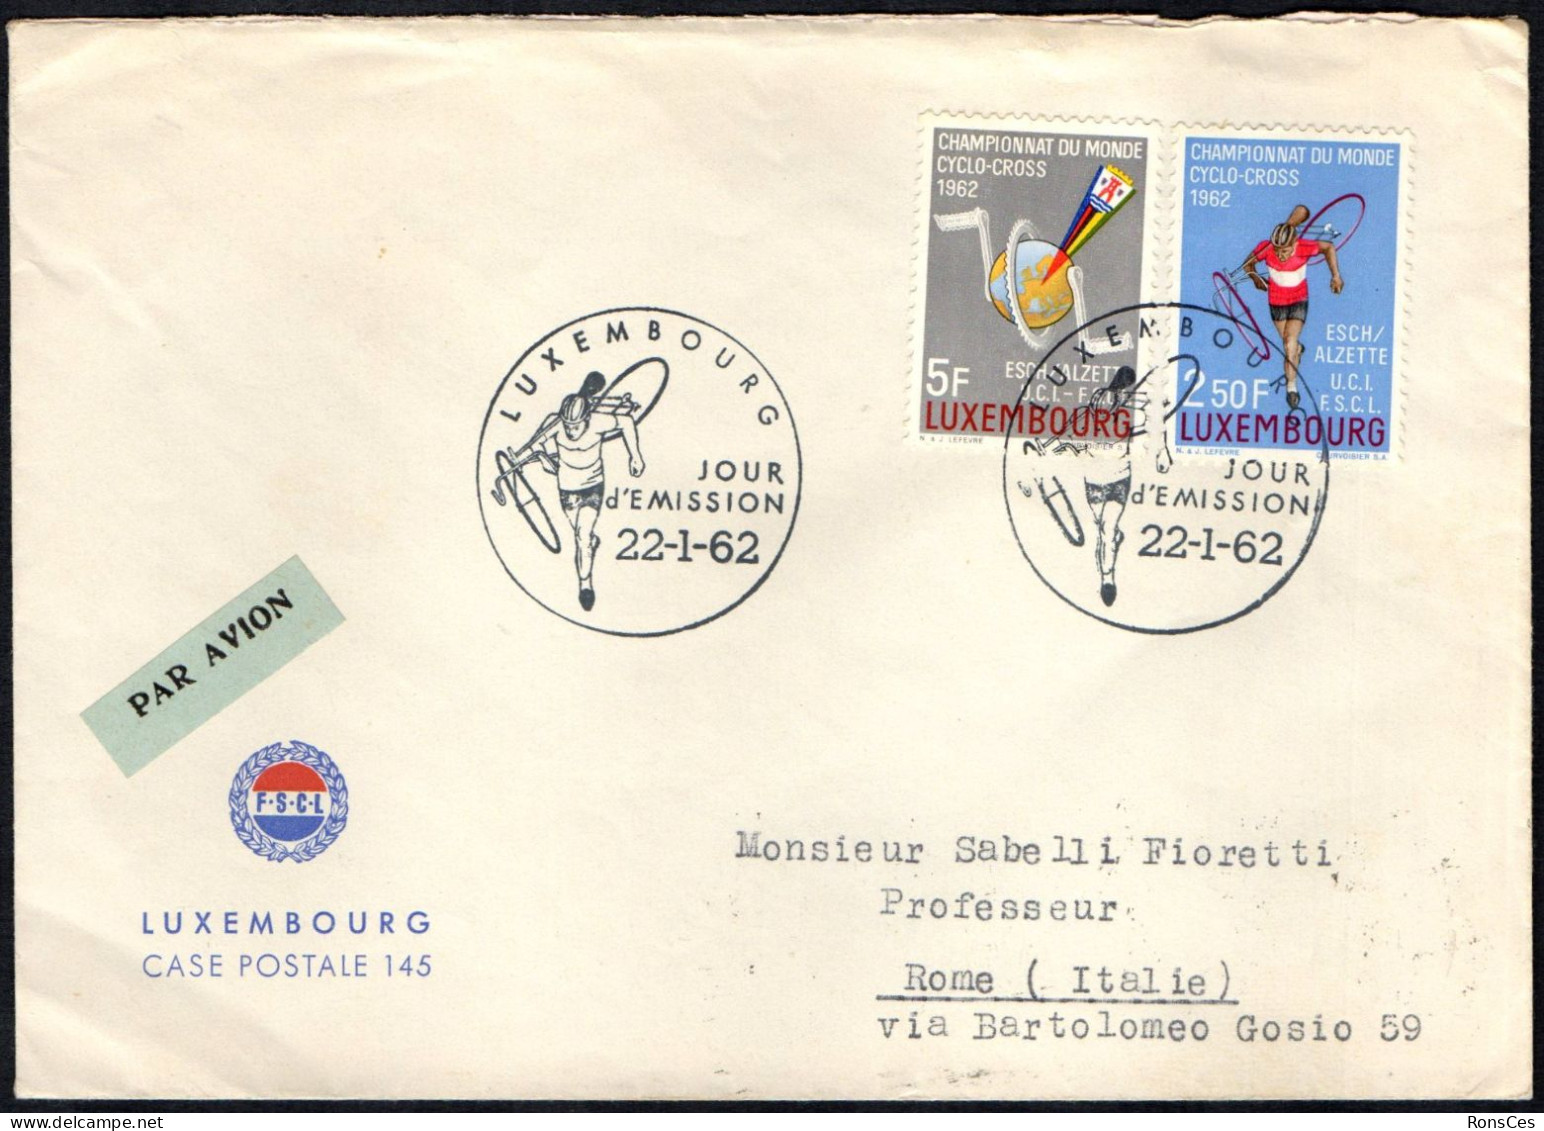 CYCLING - LUXEMBOURG 1962 - CHAMPIONNAT DU MONDE CYCLO-CROSS - MAILED FDC - A - Wielrennen